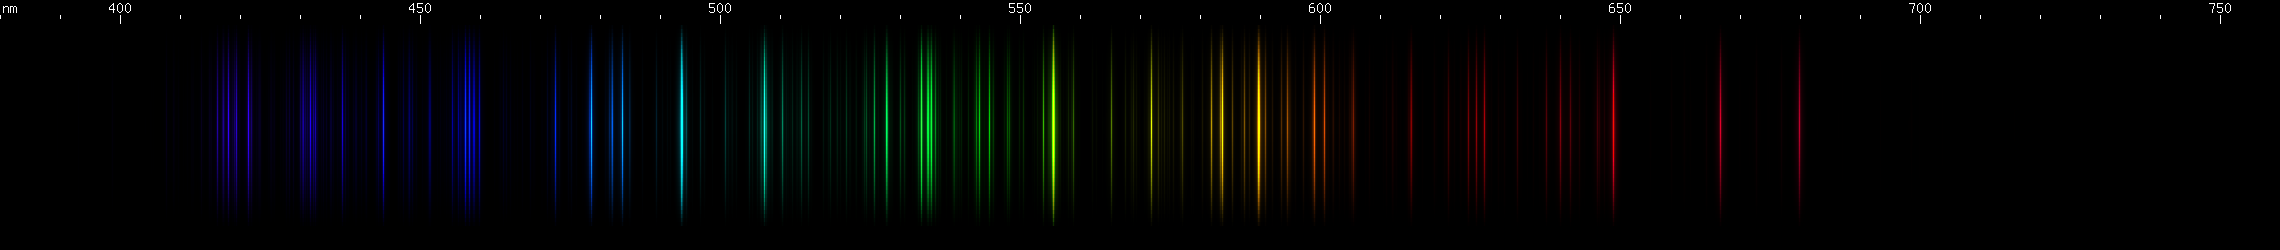 Spectral Lines of Ytterbium